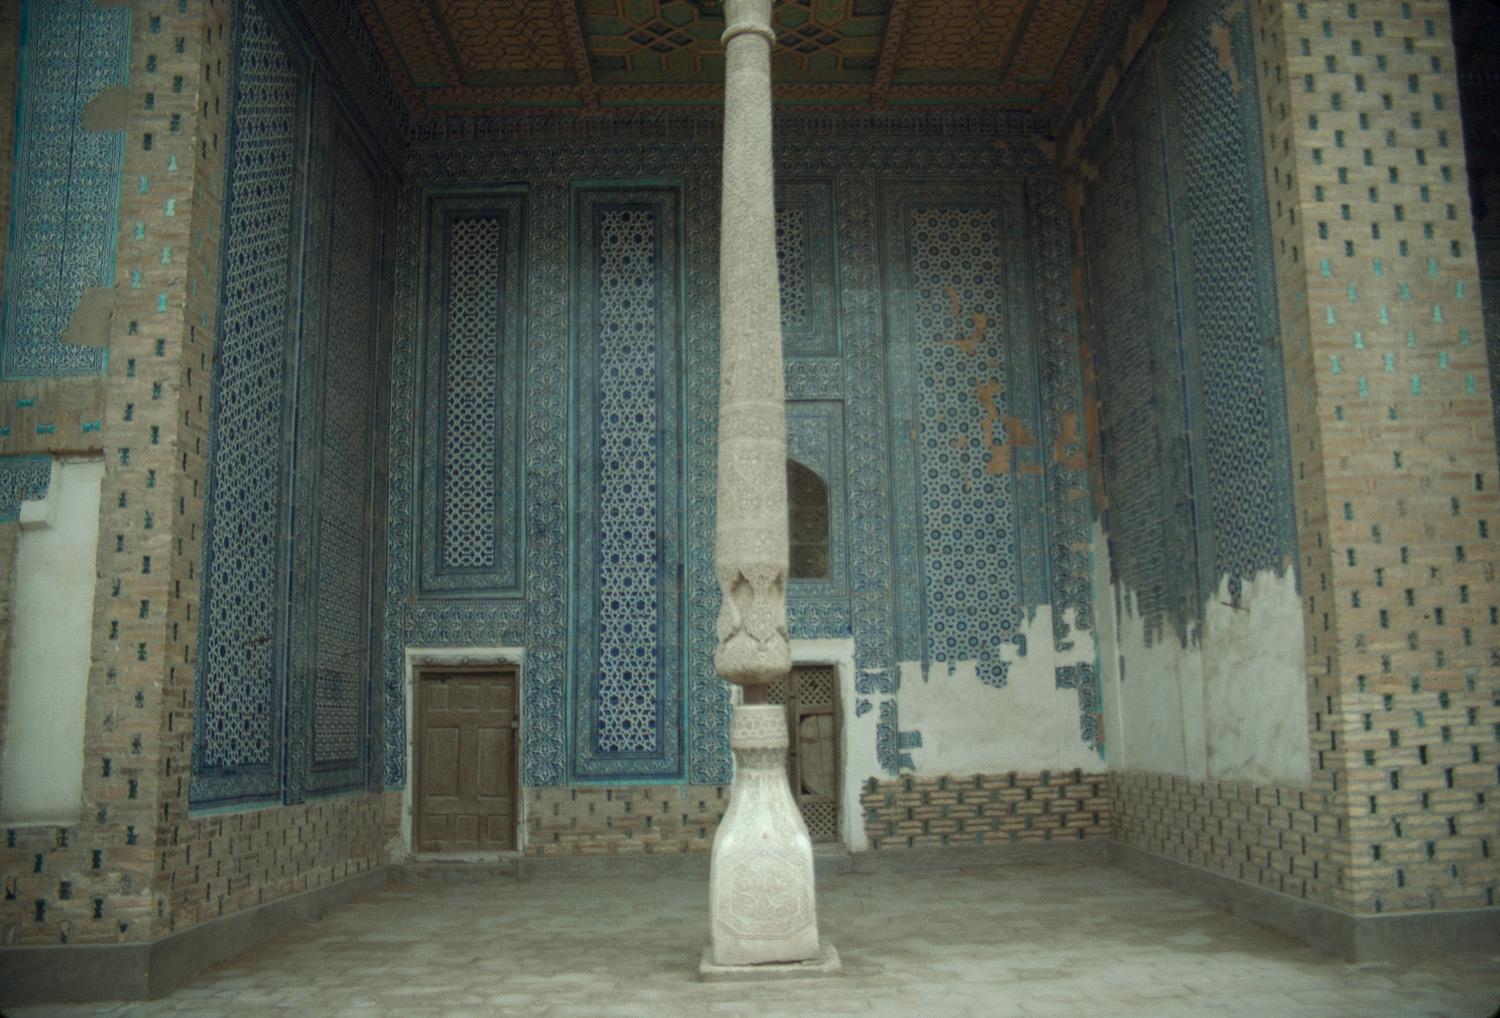 Detail from iwan looking at column base and decorated inner walls